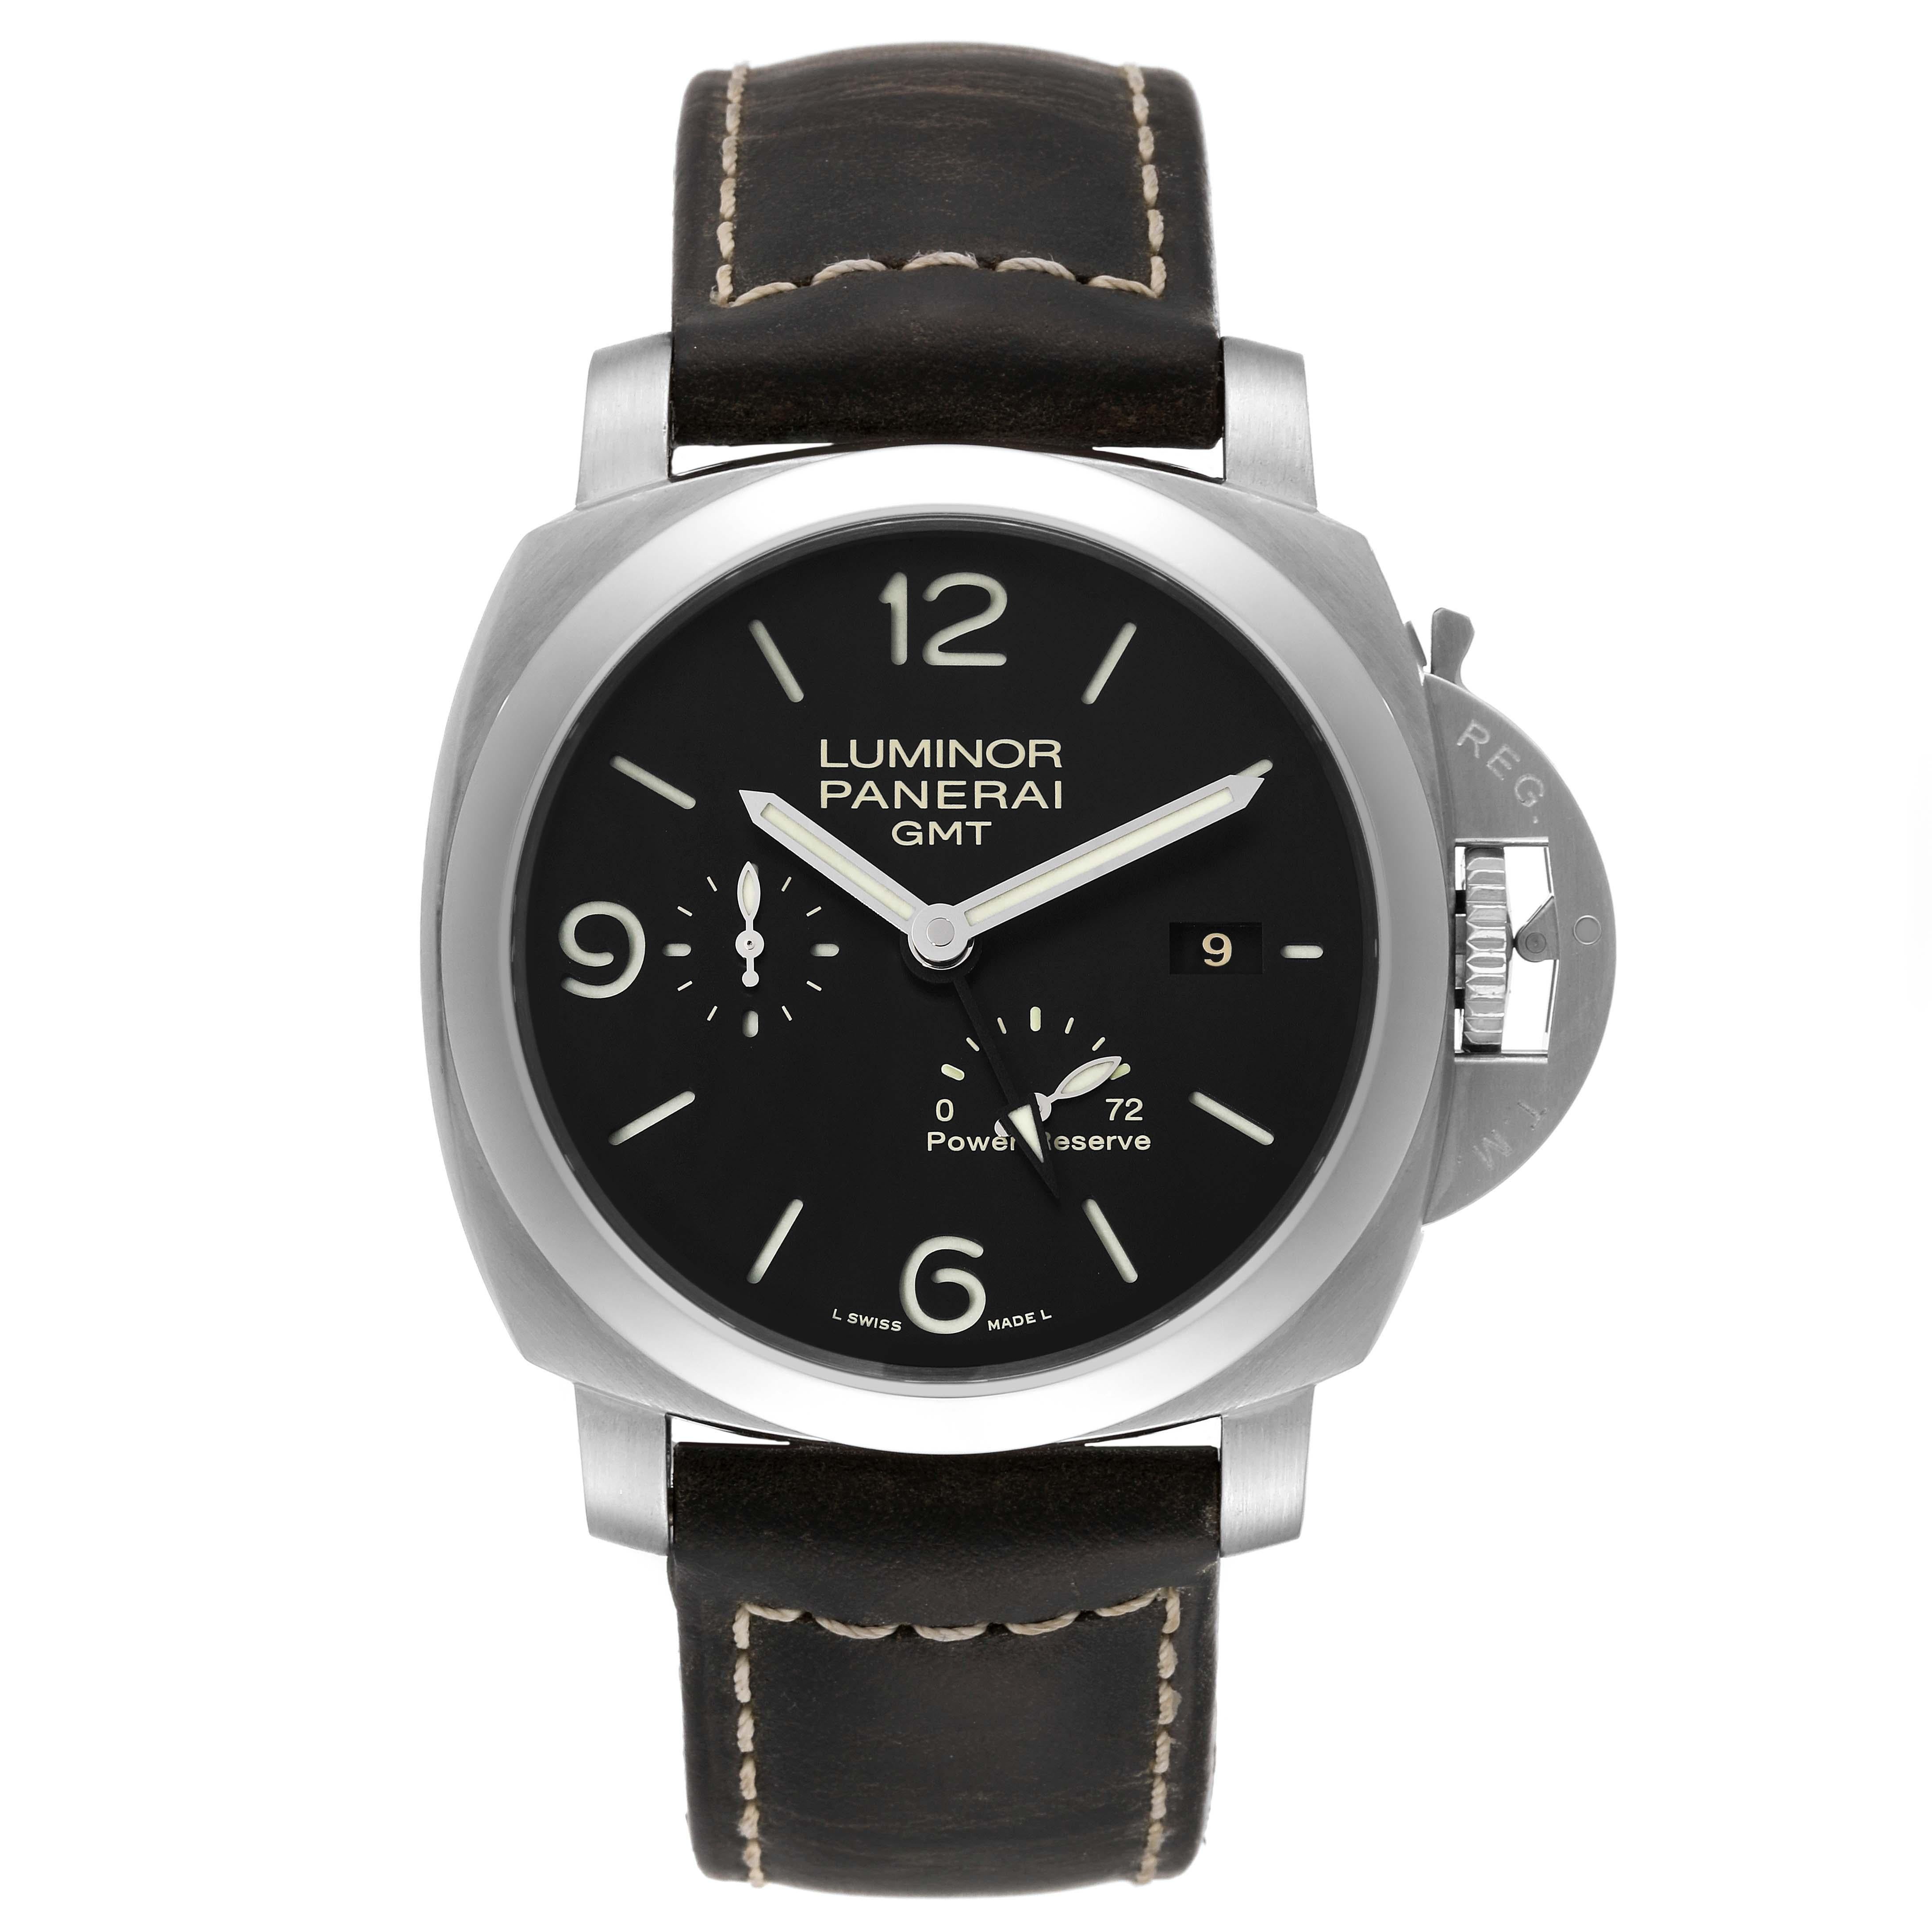 Panerai Luminor GMT 1950 3 Days Power Reserve Steel Mens Watch PAM00321. Automatic self-winding movement. Two part cushion shaped stainless steel case 44.0 mm in diameter. Panerai patented crown protector. Transparent exhibition sapphire crystal